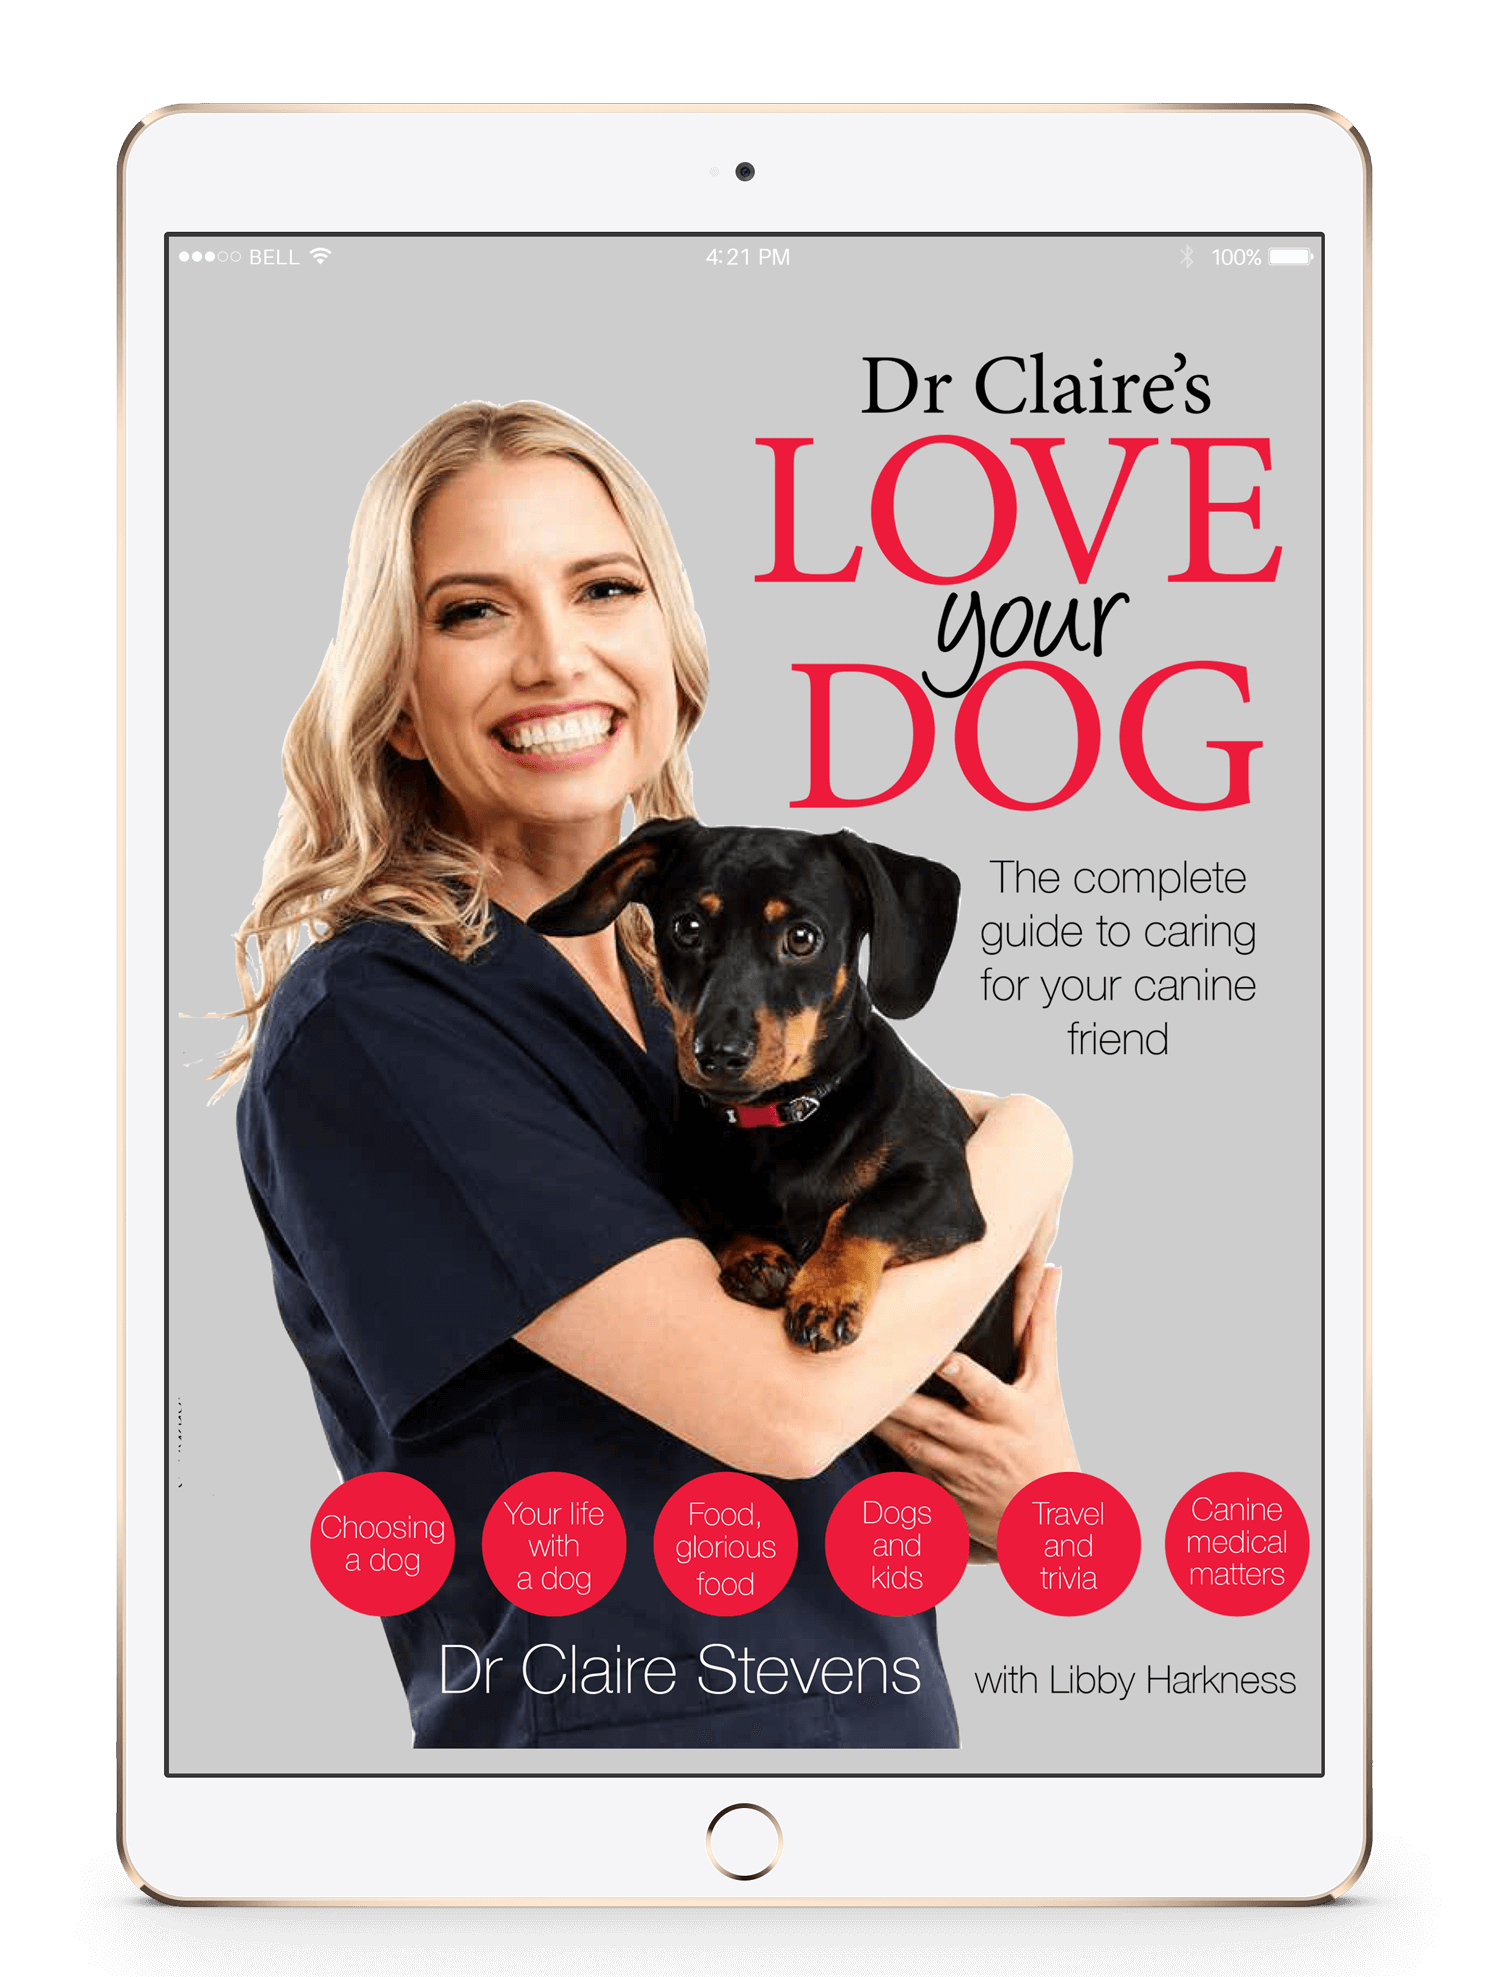 DR CLAIRE STEVENS LOVE YOUR DOG BOOK 2020